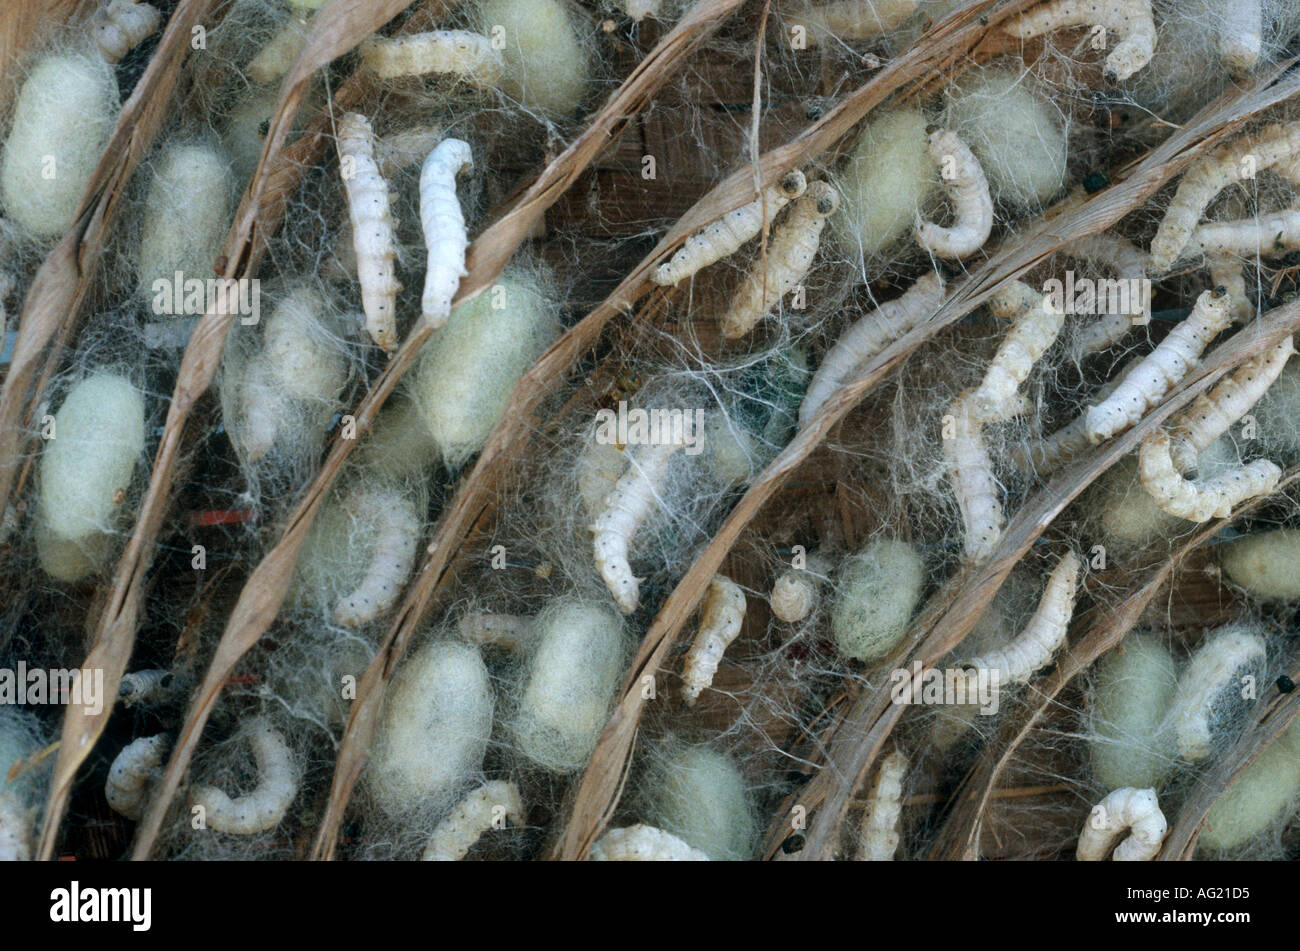 Silkworms and cocoons in India Stock Photo